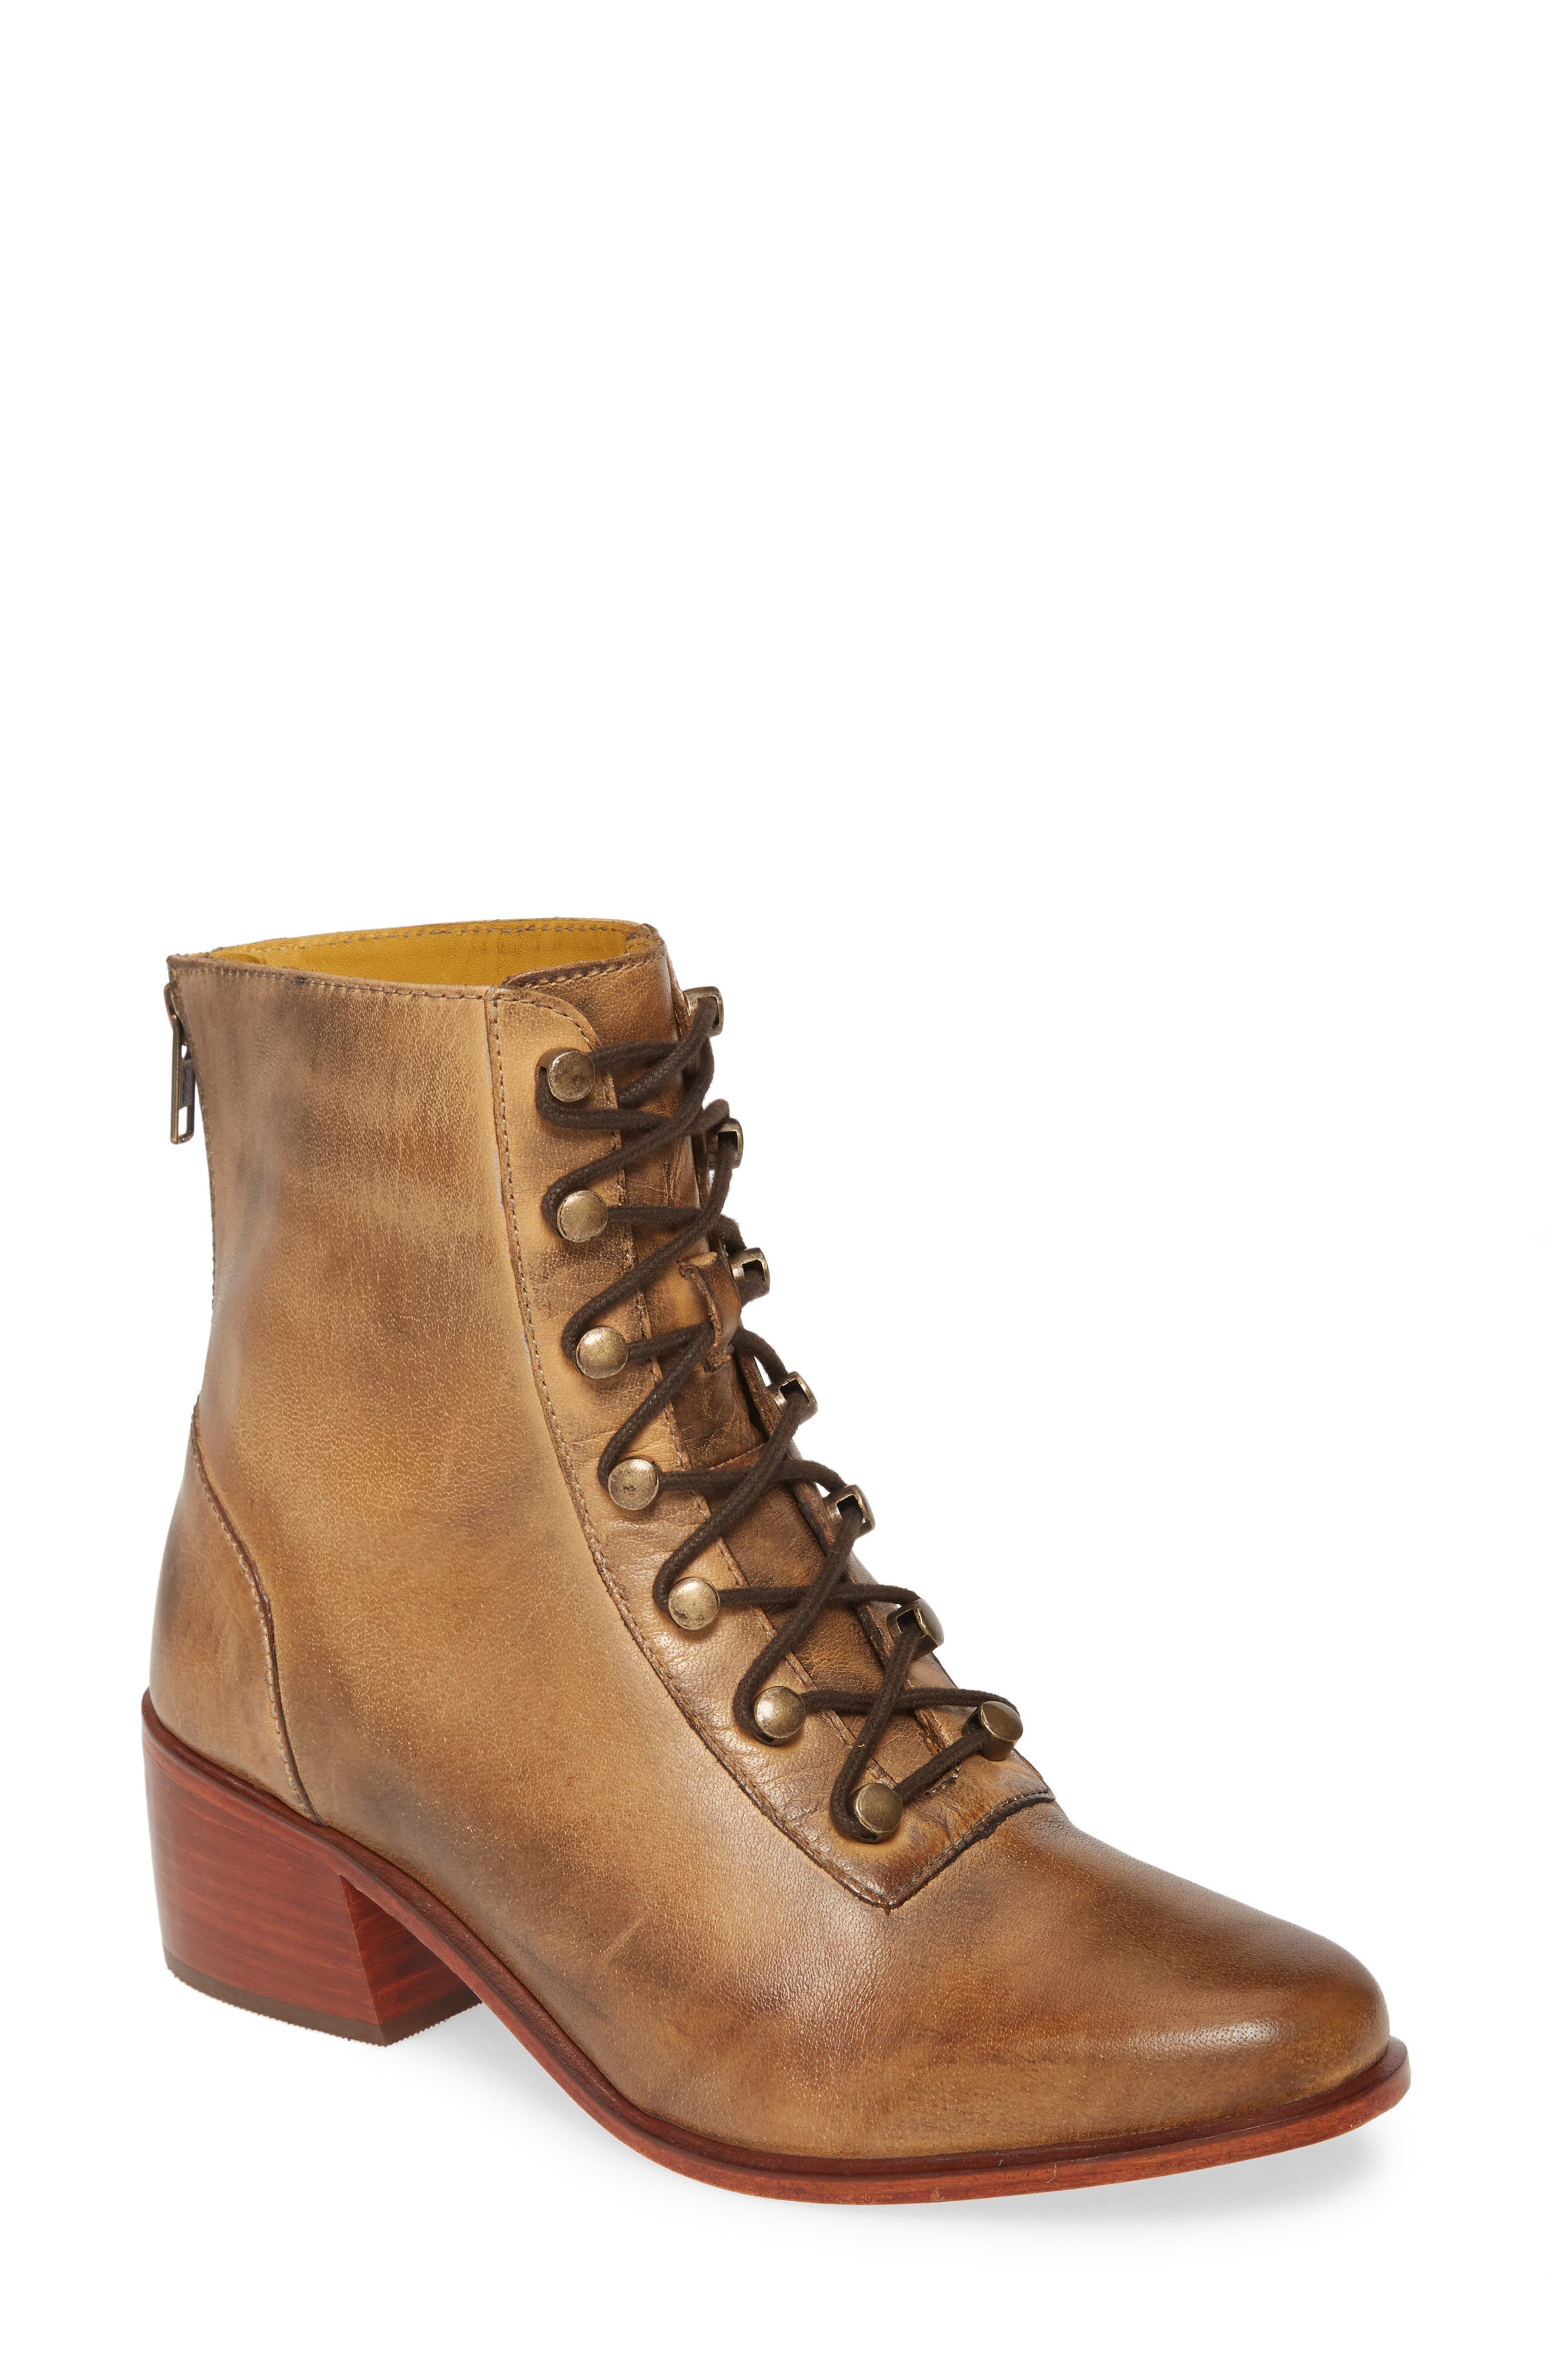 free people combat boots